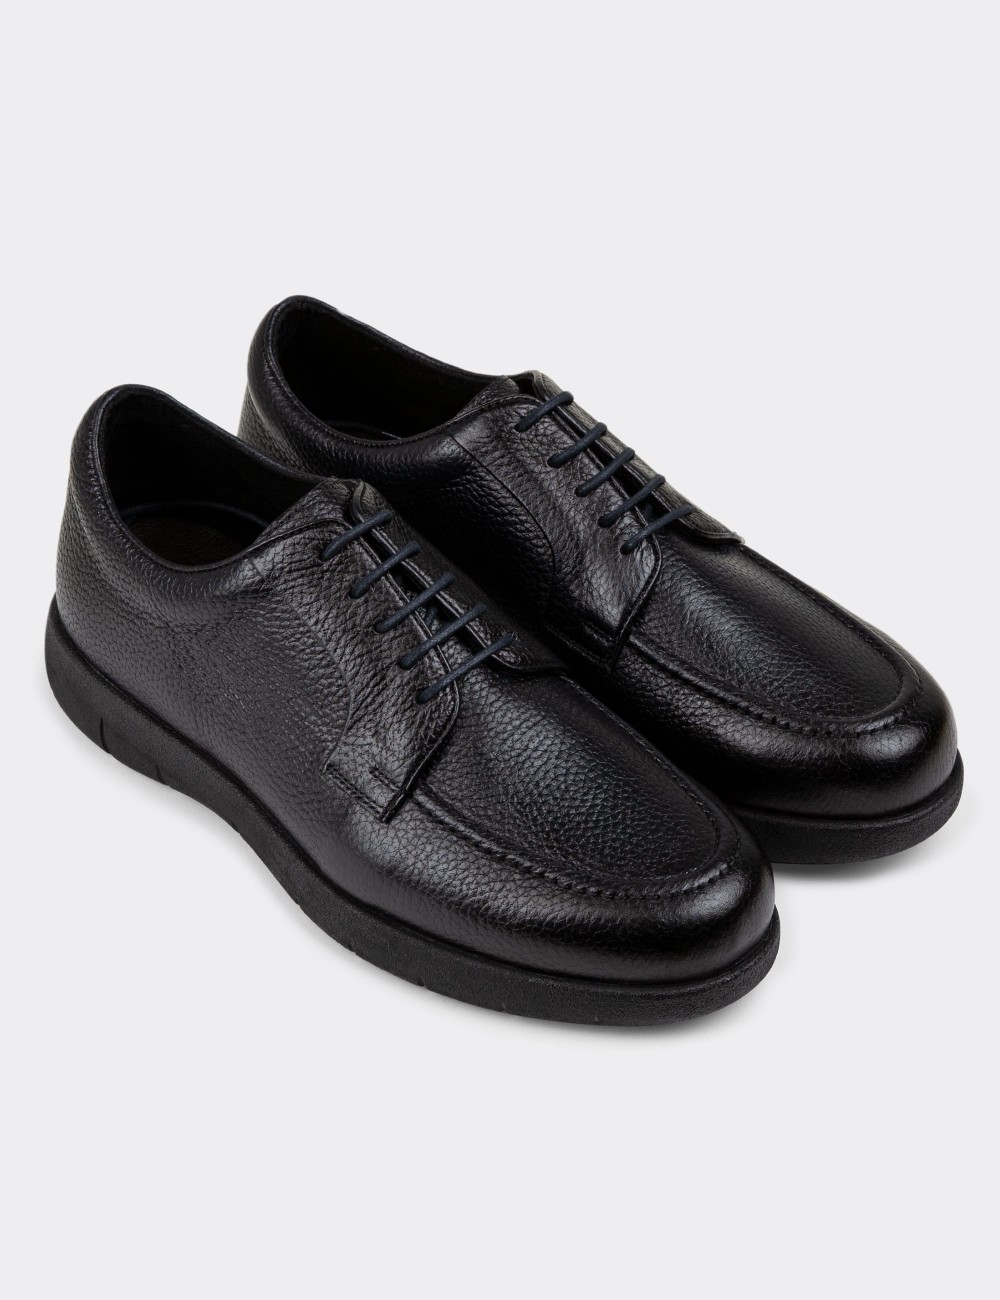 Navy Leather Lace-up Shoes - 01930MLCVC01